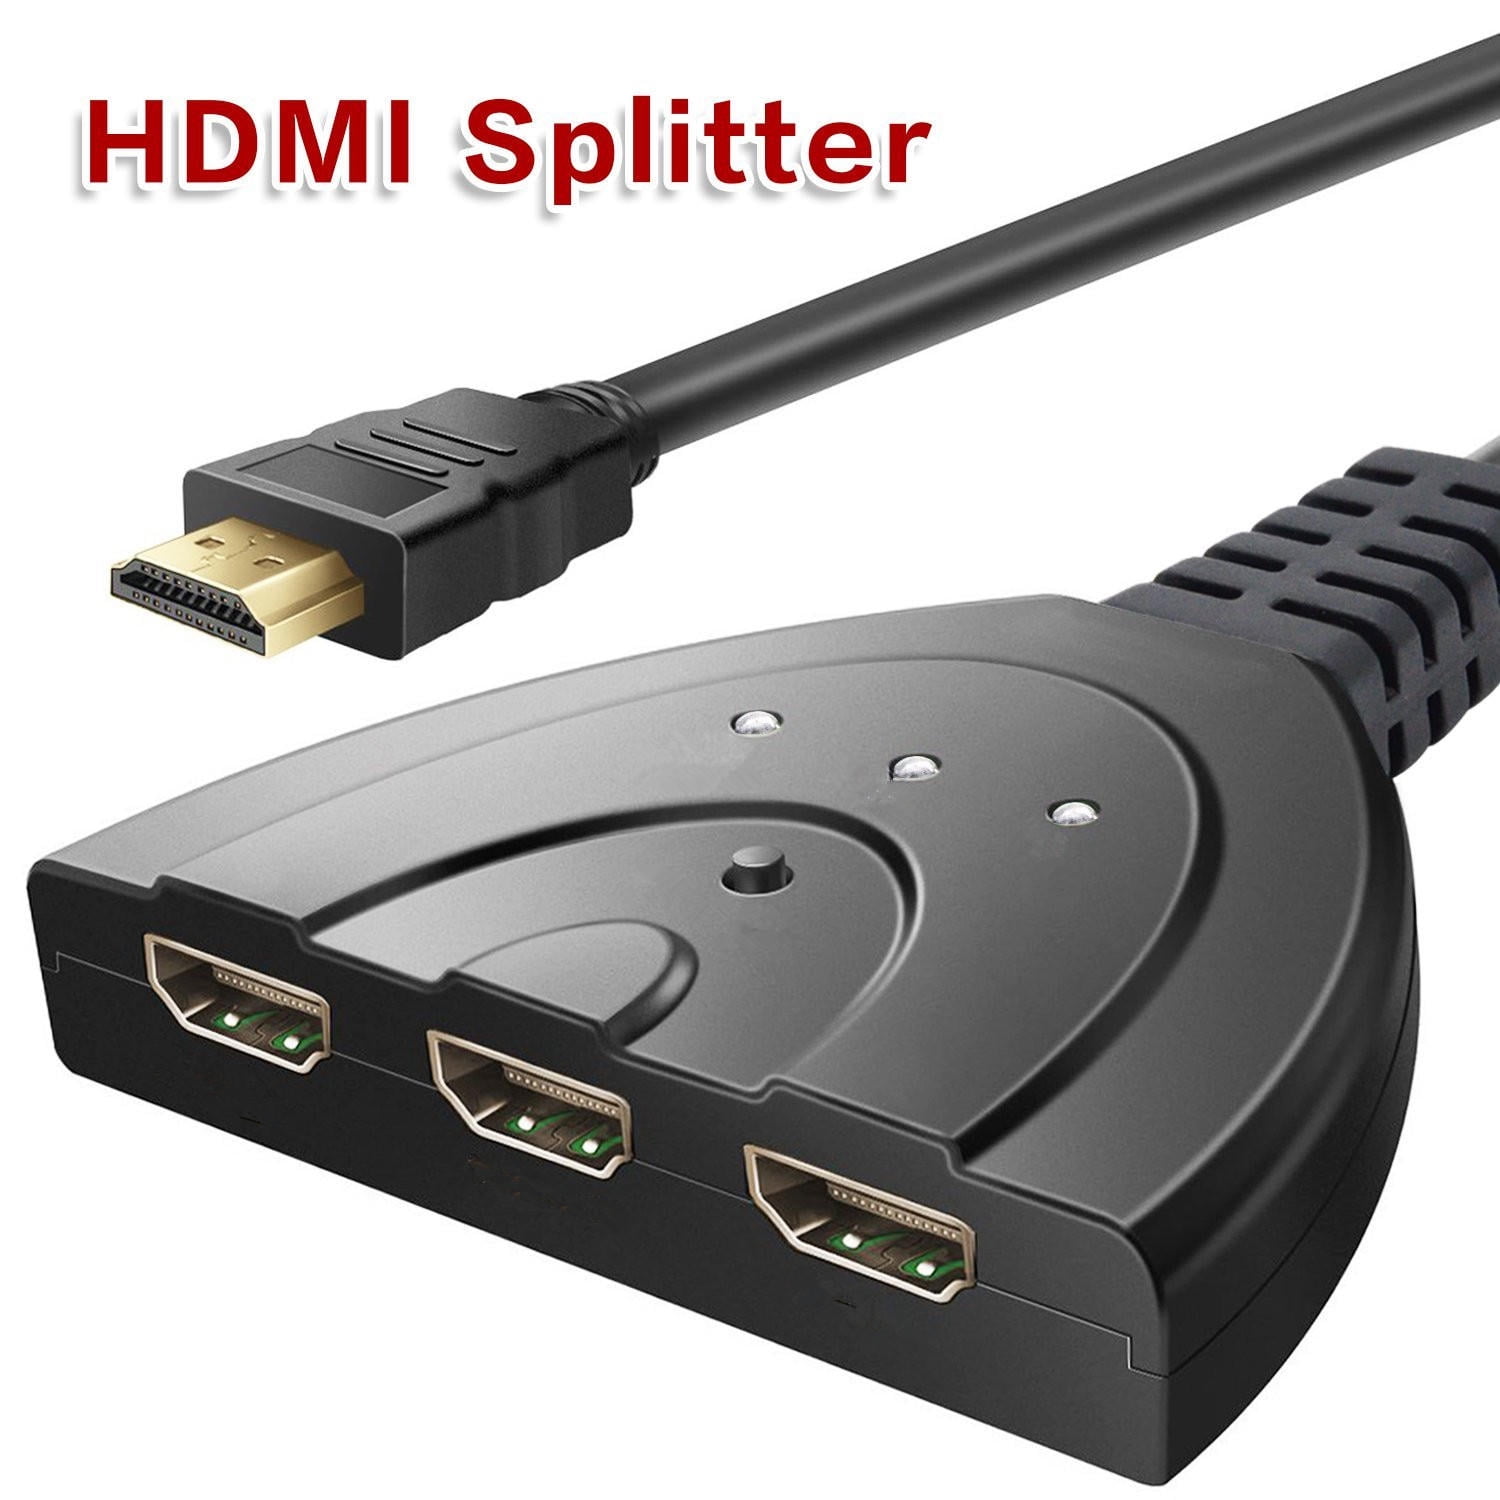 3 Port HDMI Switcher Splitter 3D 1080P Full Input 1 Output Auto High Speed HDMI Switch Switcher Splitter Cable Hub Box Adapter for HDTV DVD Xbox 360 With 24K Gold